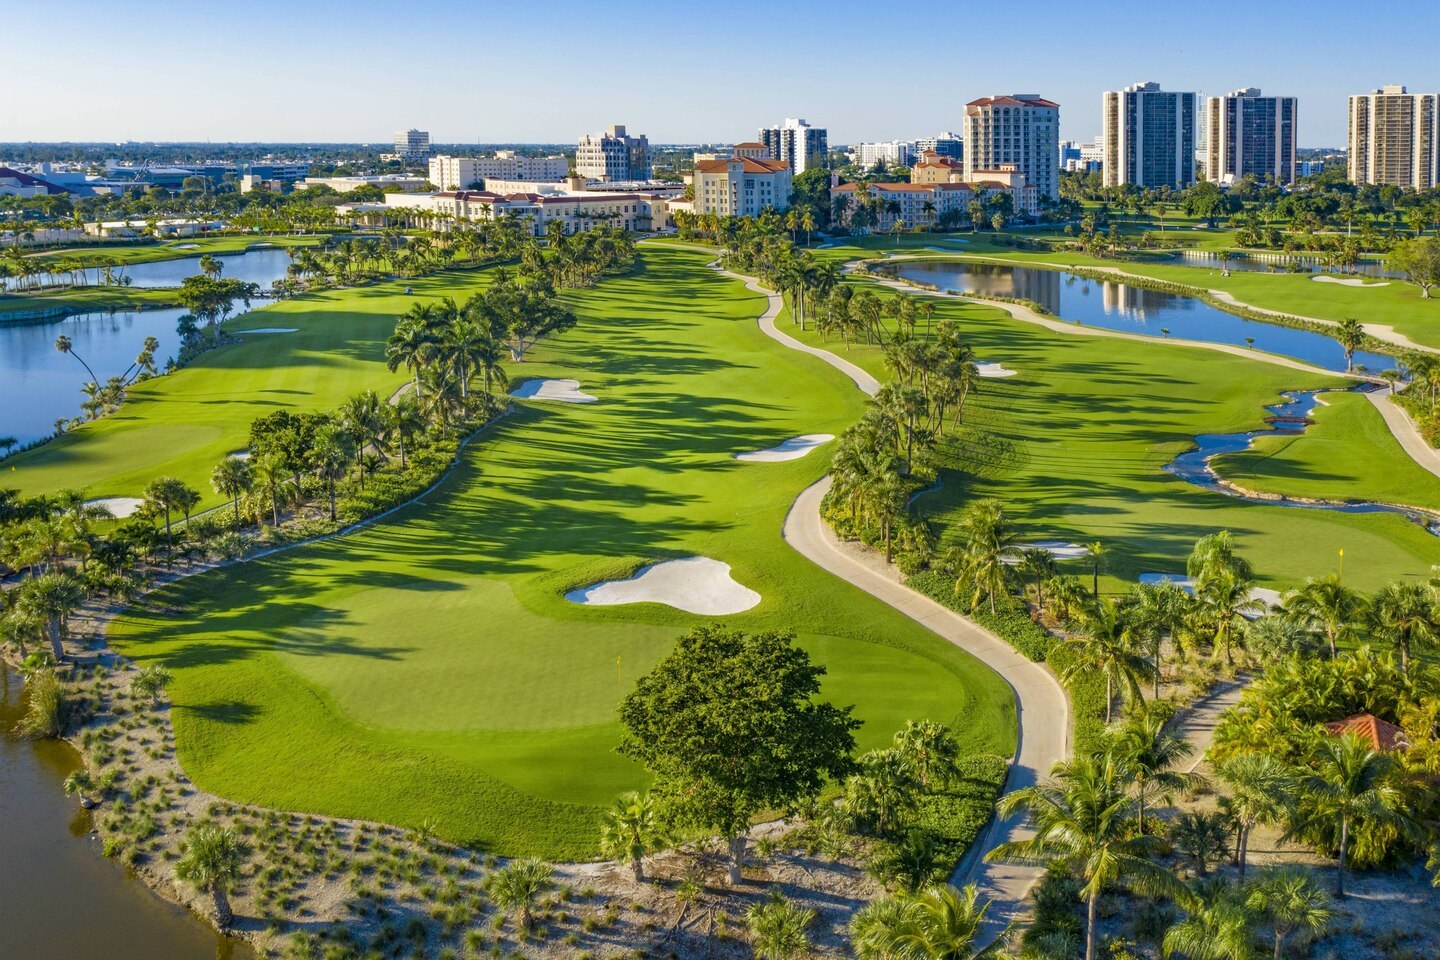 Golf Vacation Package - JW Marriott Miami Turnberry Resort & Spa Peak Season Stay & Play from 661.00 per day!